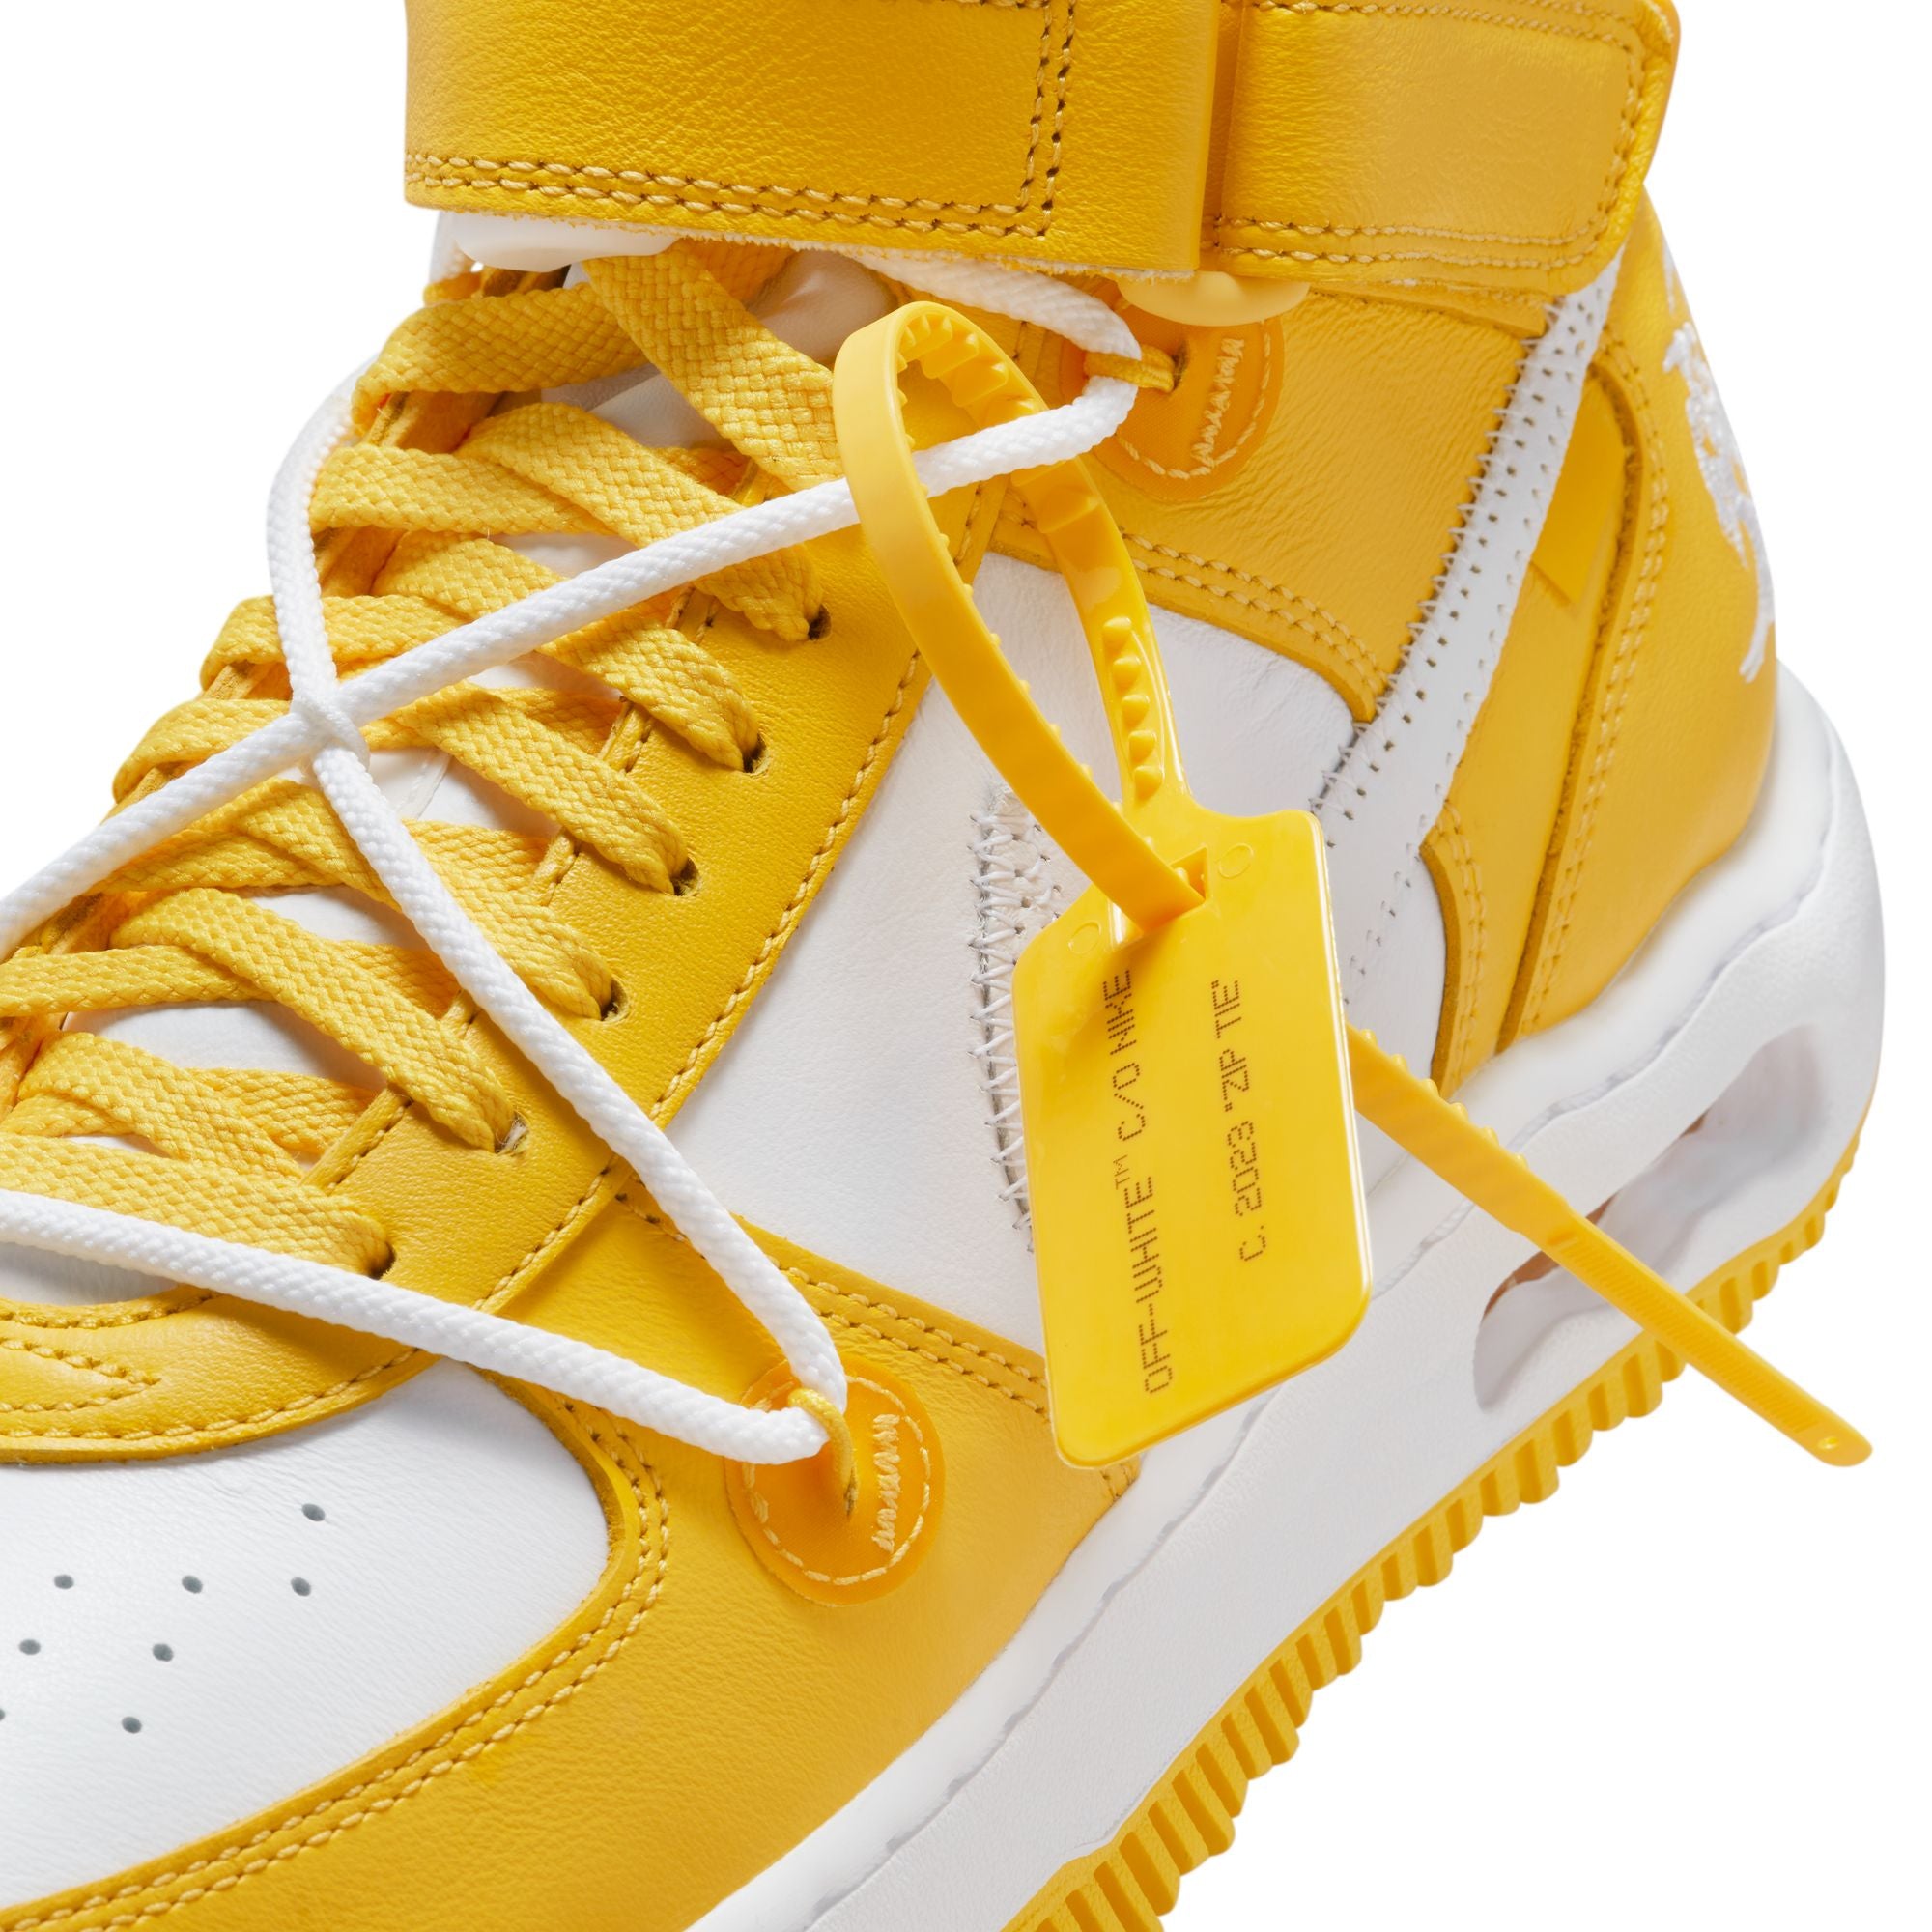 NIKE - Air Force 1 Mid Sp Lthr - (White/White-Varsity Maize) view 10